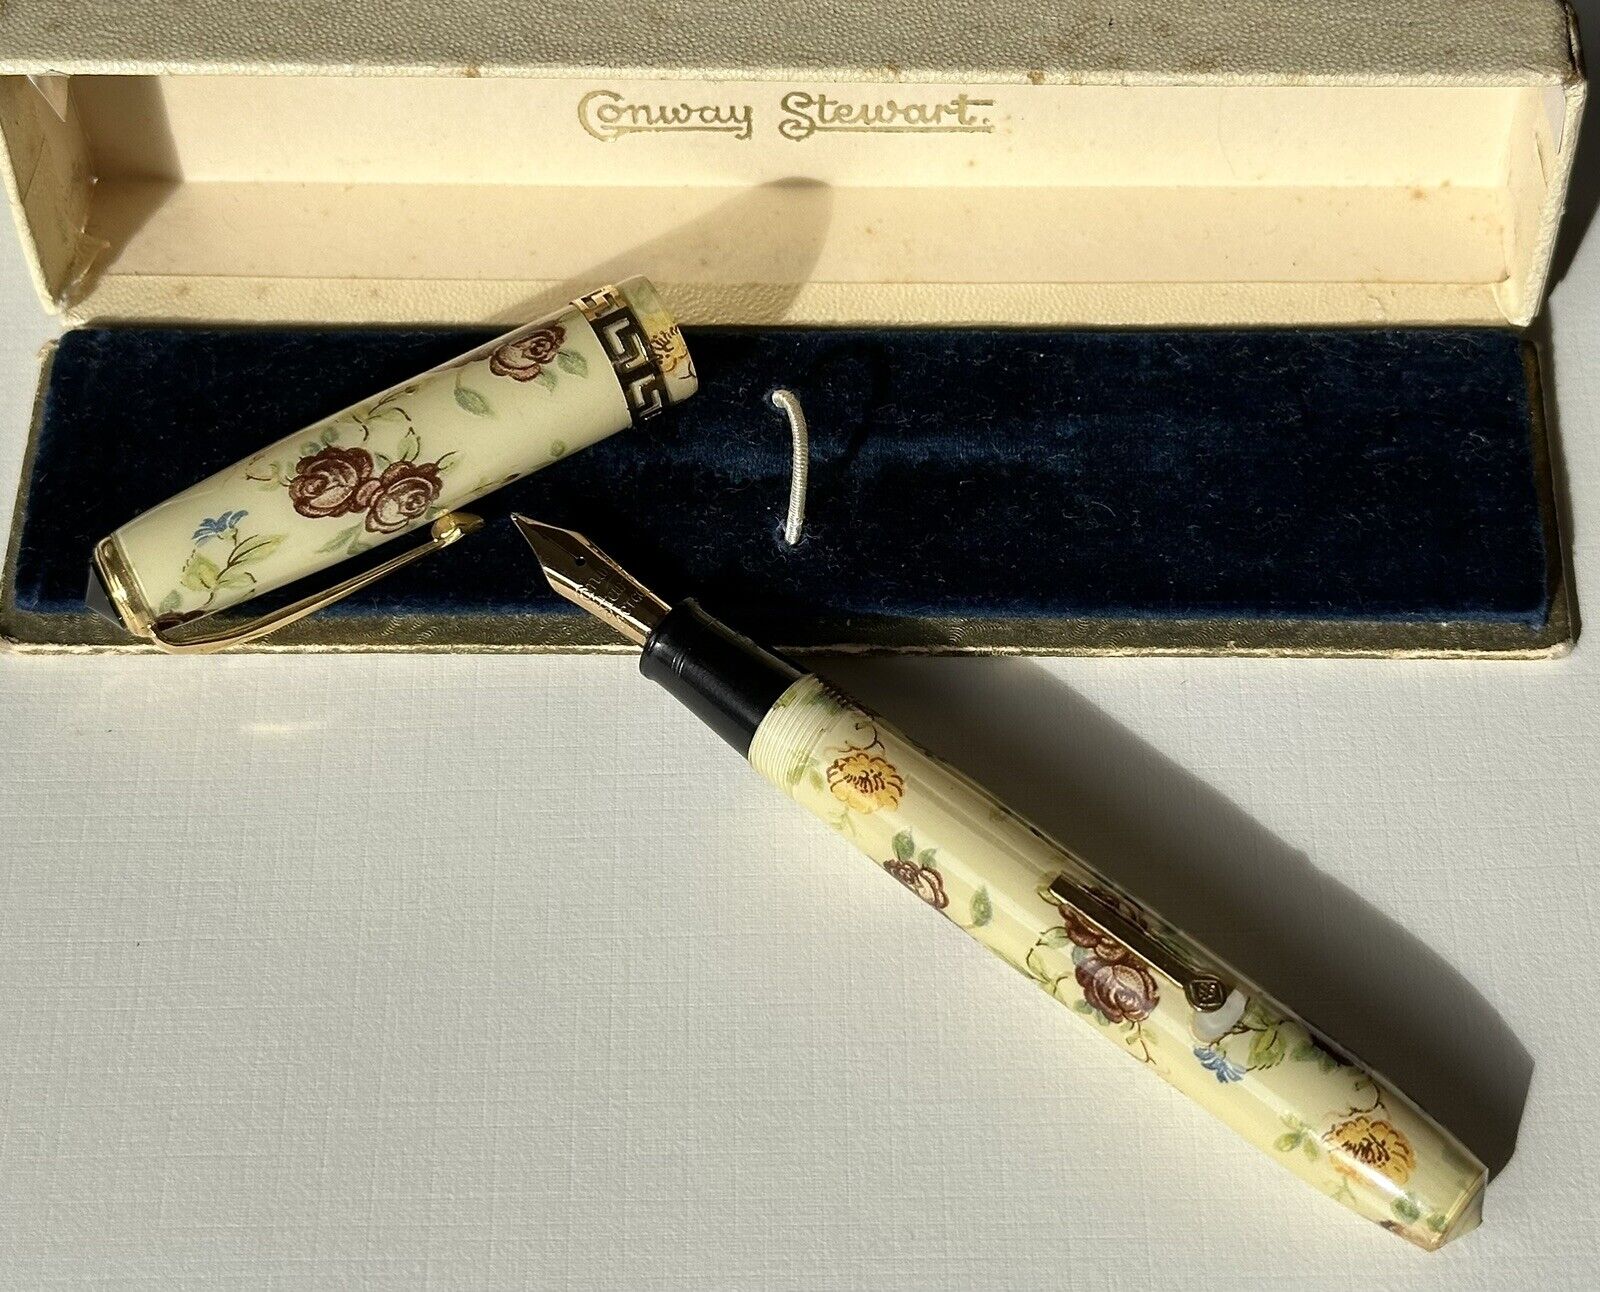 Vintage Conway Stewart No 22 Rare Floral Fountain Pen in Excellent Condition